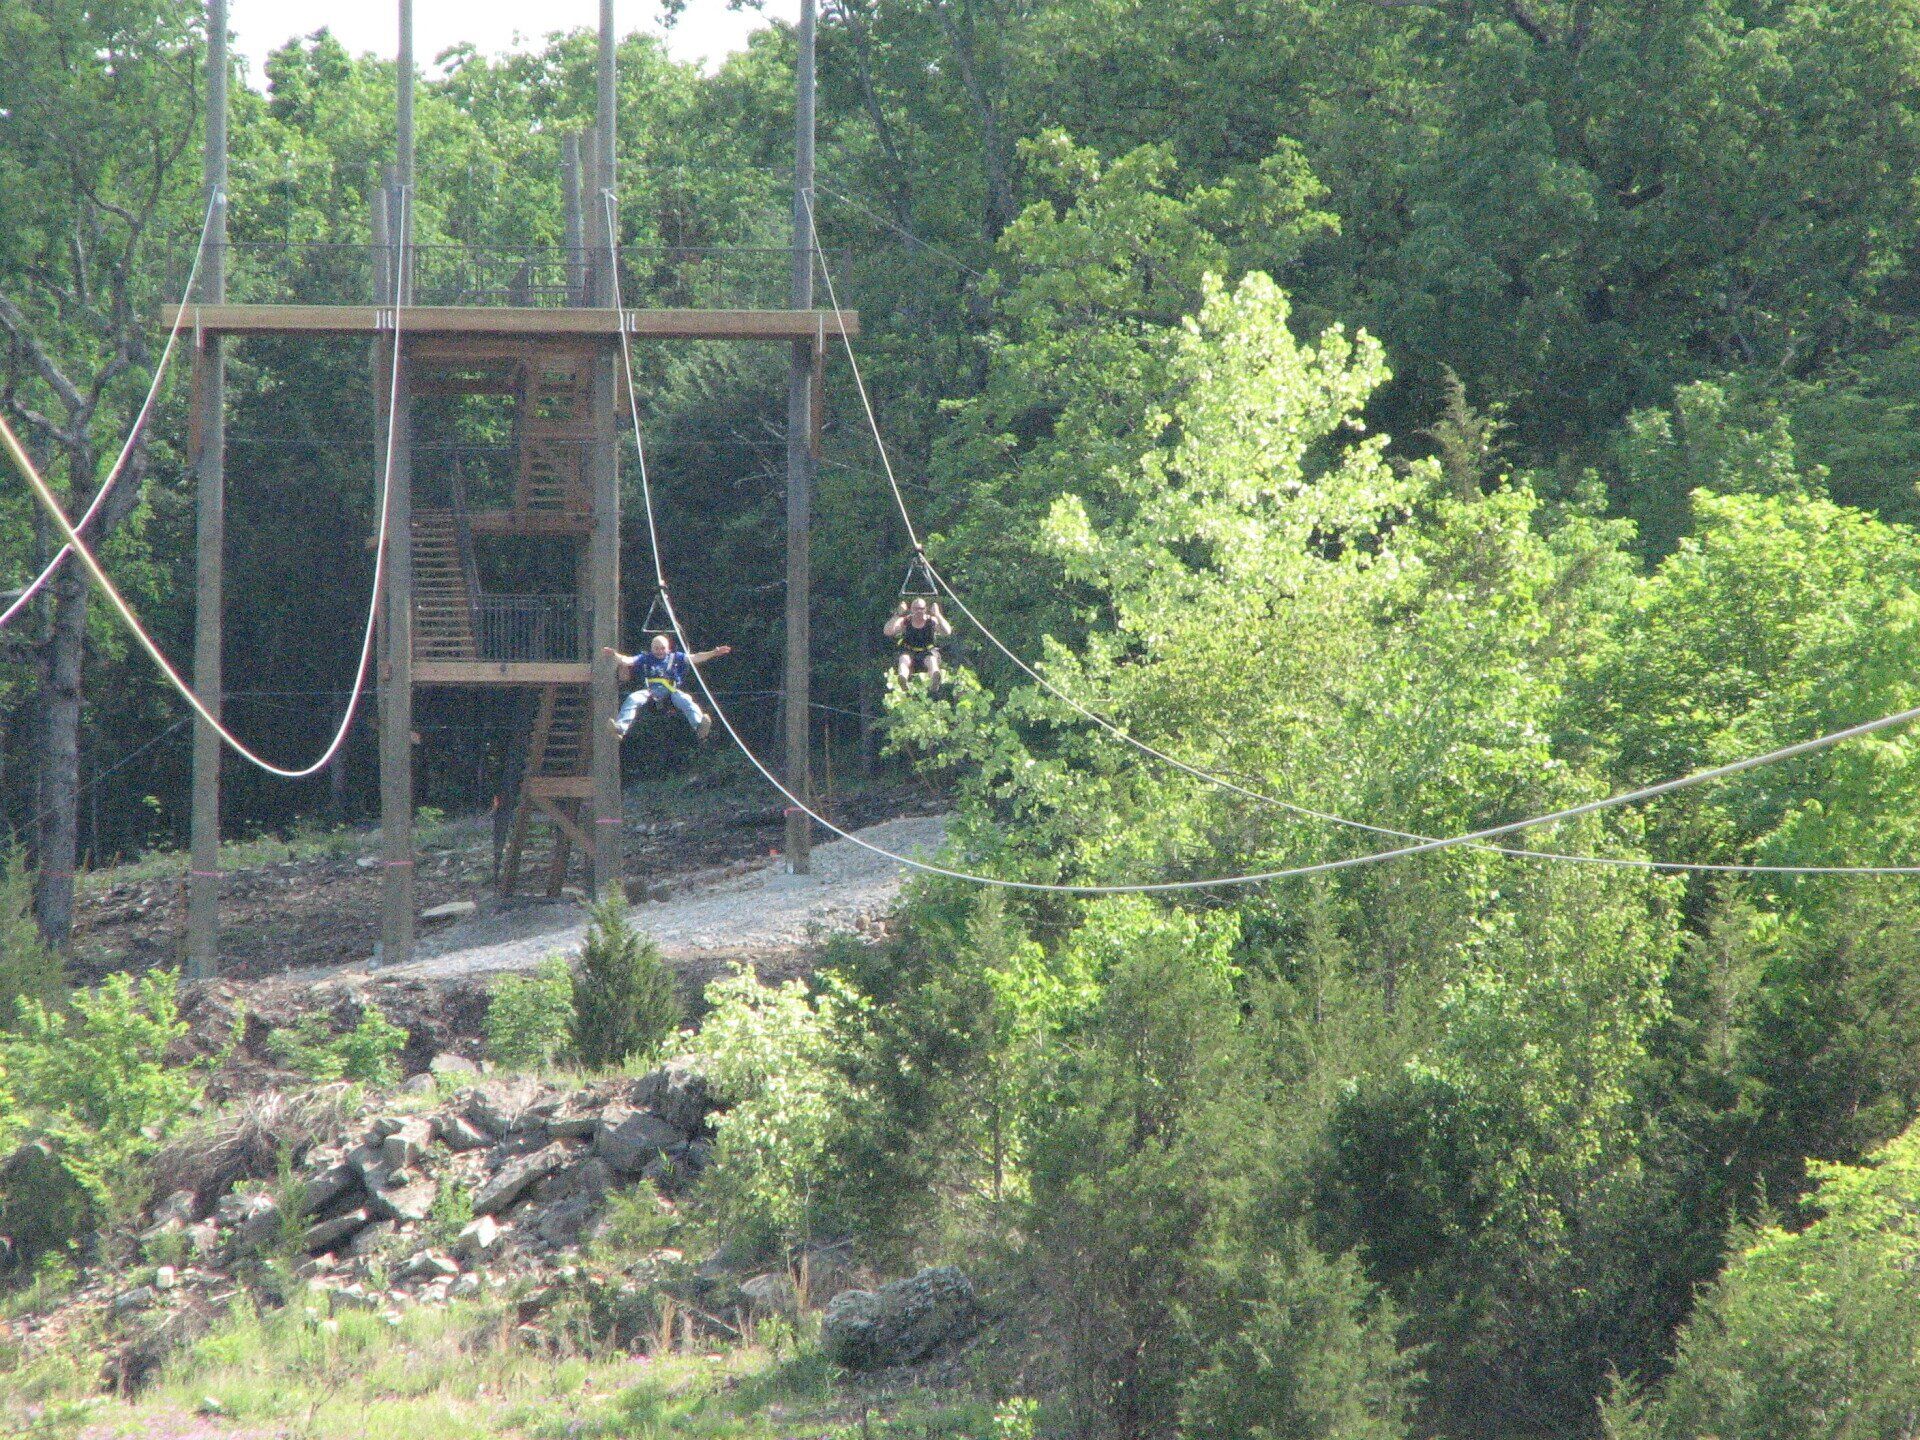 Far view of two people at the zipline